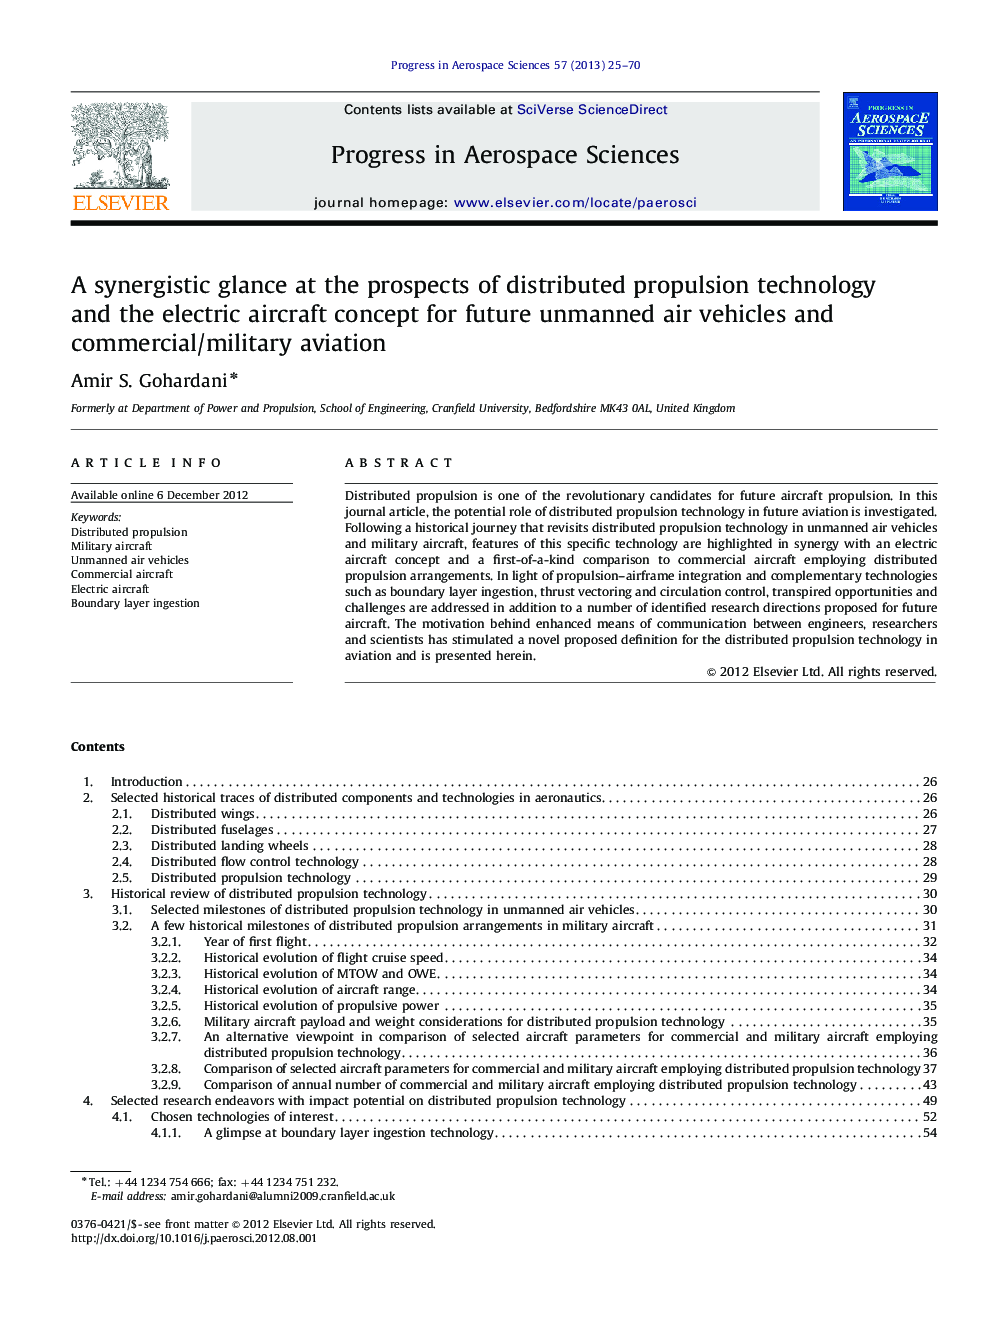 A synergistic glance at the prospects of distributed propulsion technology and the electric aircraft concept for future unmanned air vehicles and commercial/military aviation